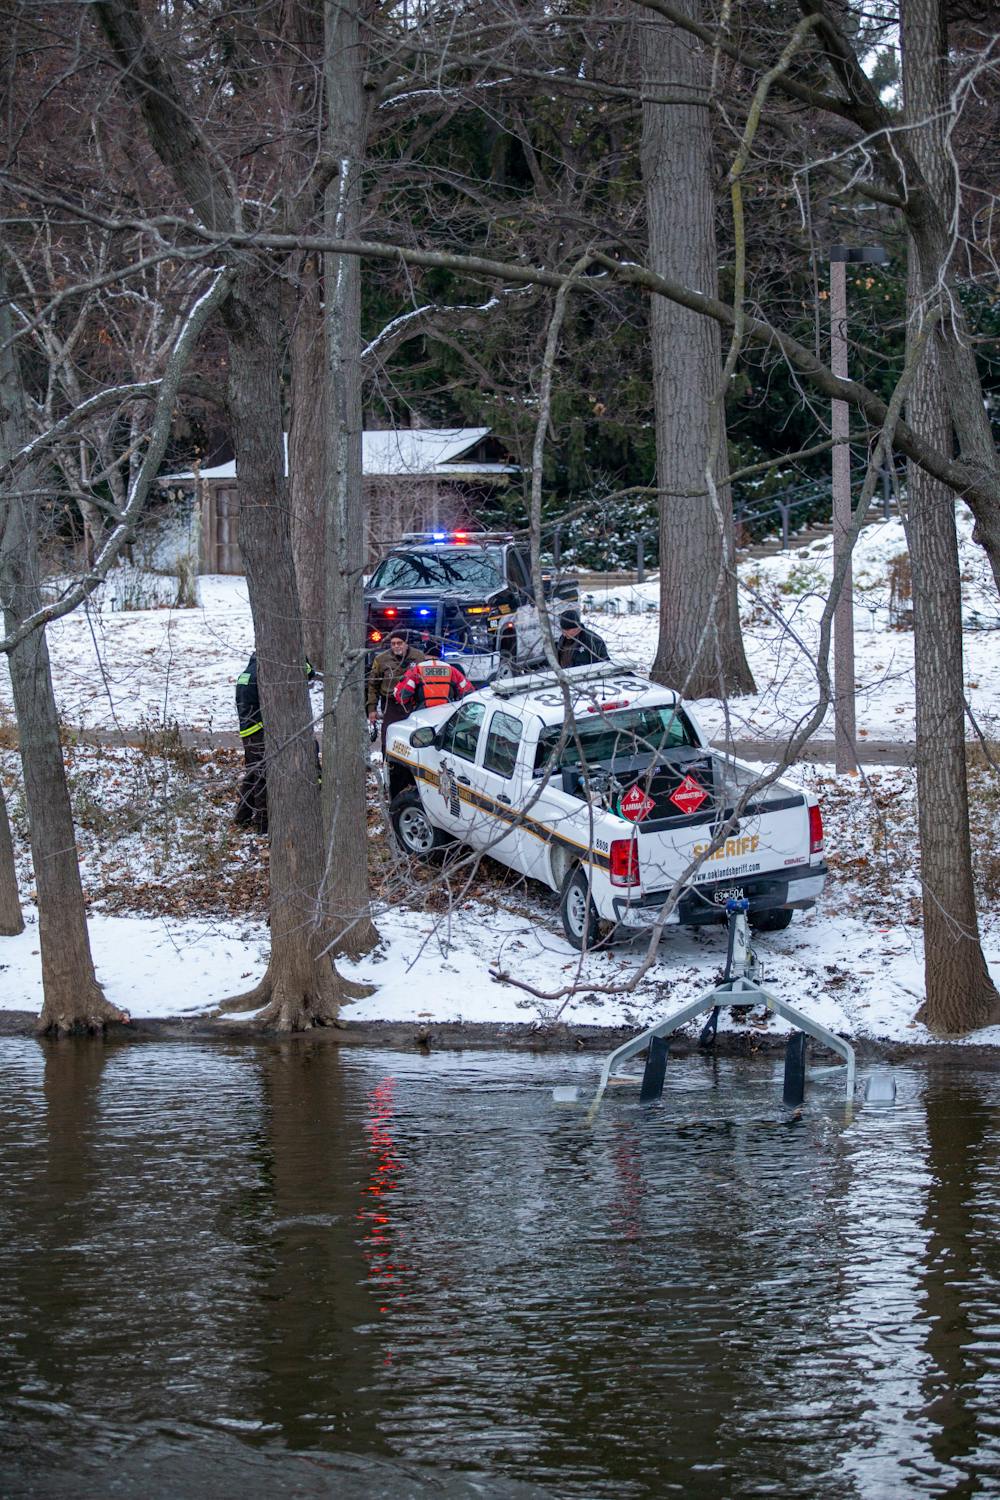 <p>A truck pulls a boat out of the water in the latest search for missing 18-year-old Brendan Santo. Shot on Dec. 9, 2021.</p>